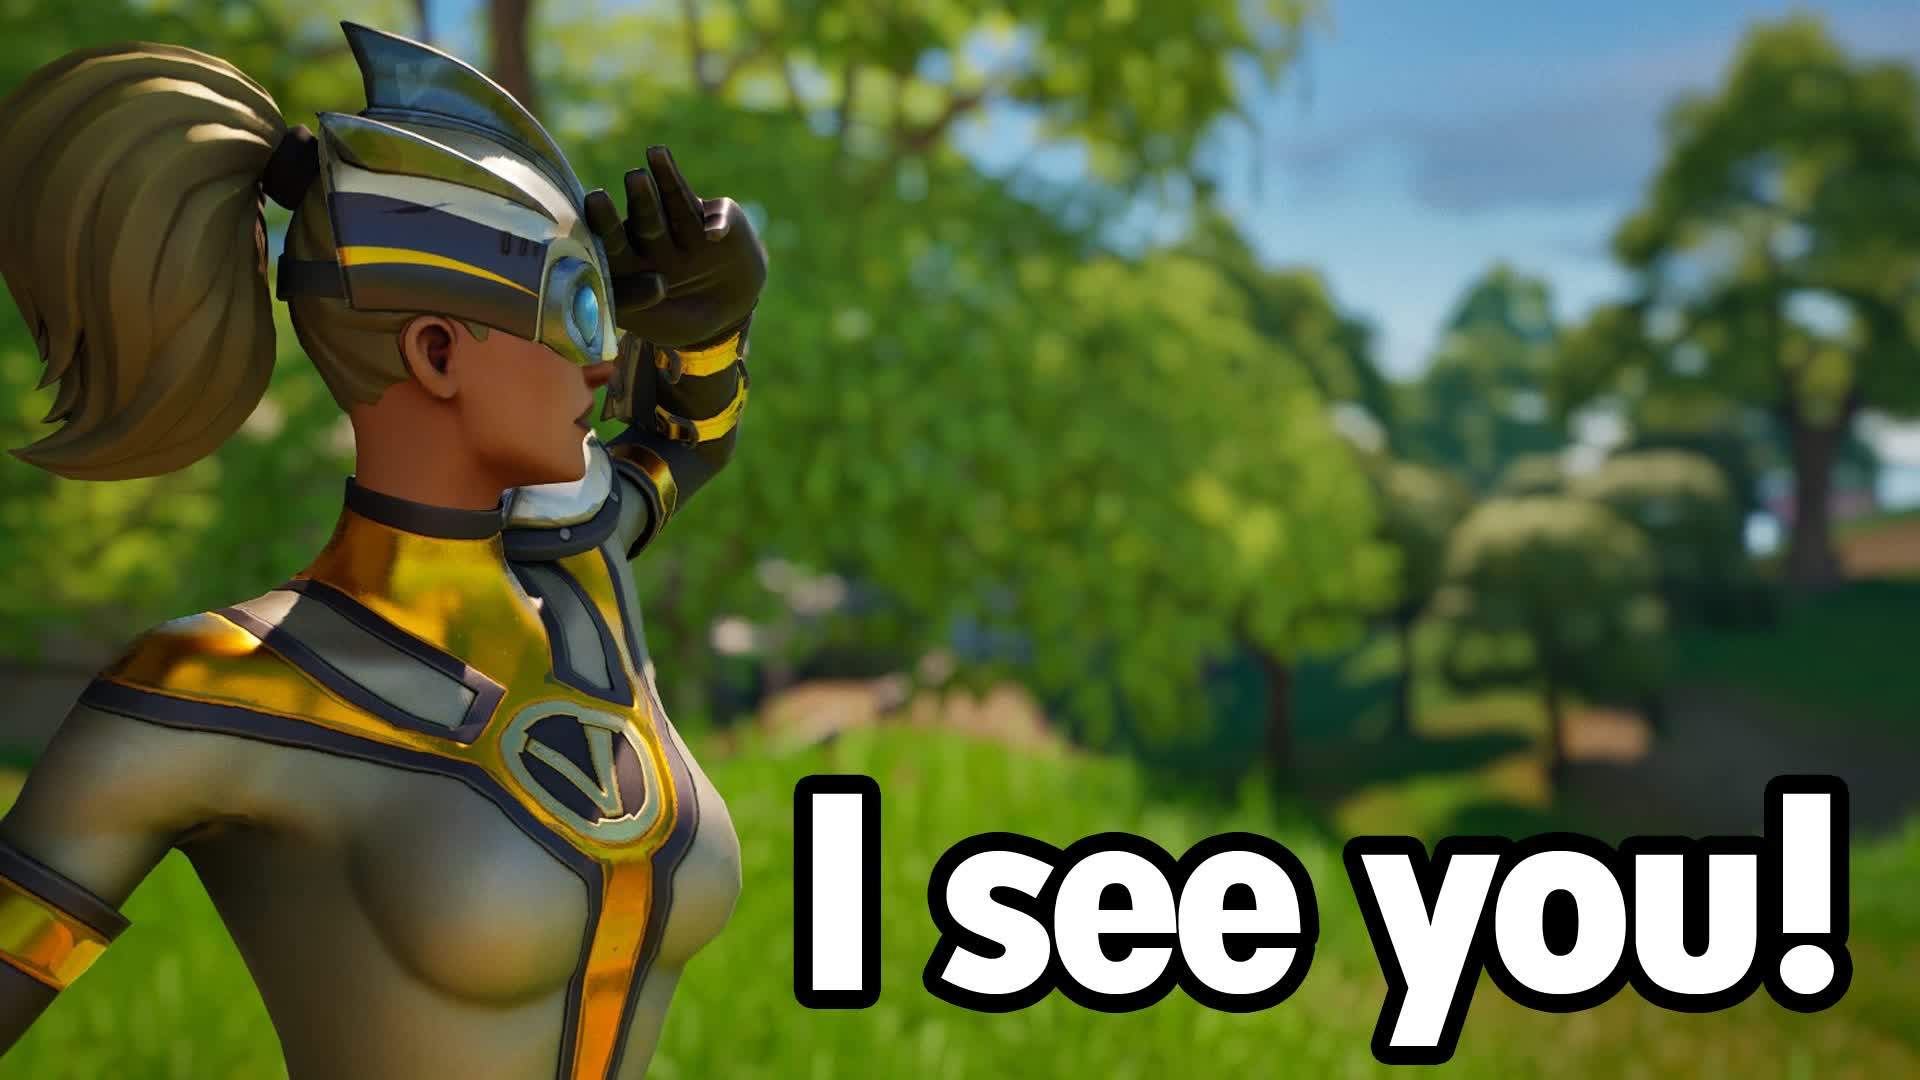 I SEE YOU!